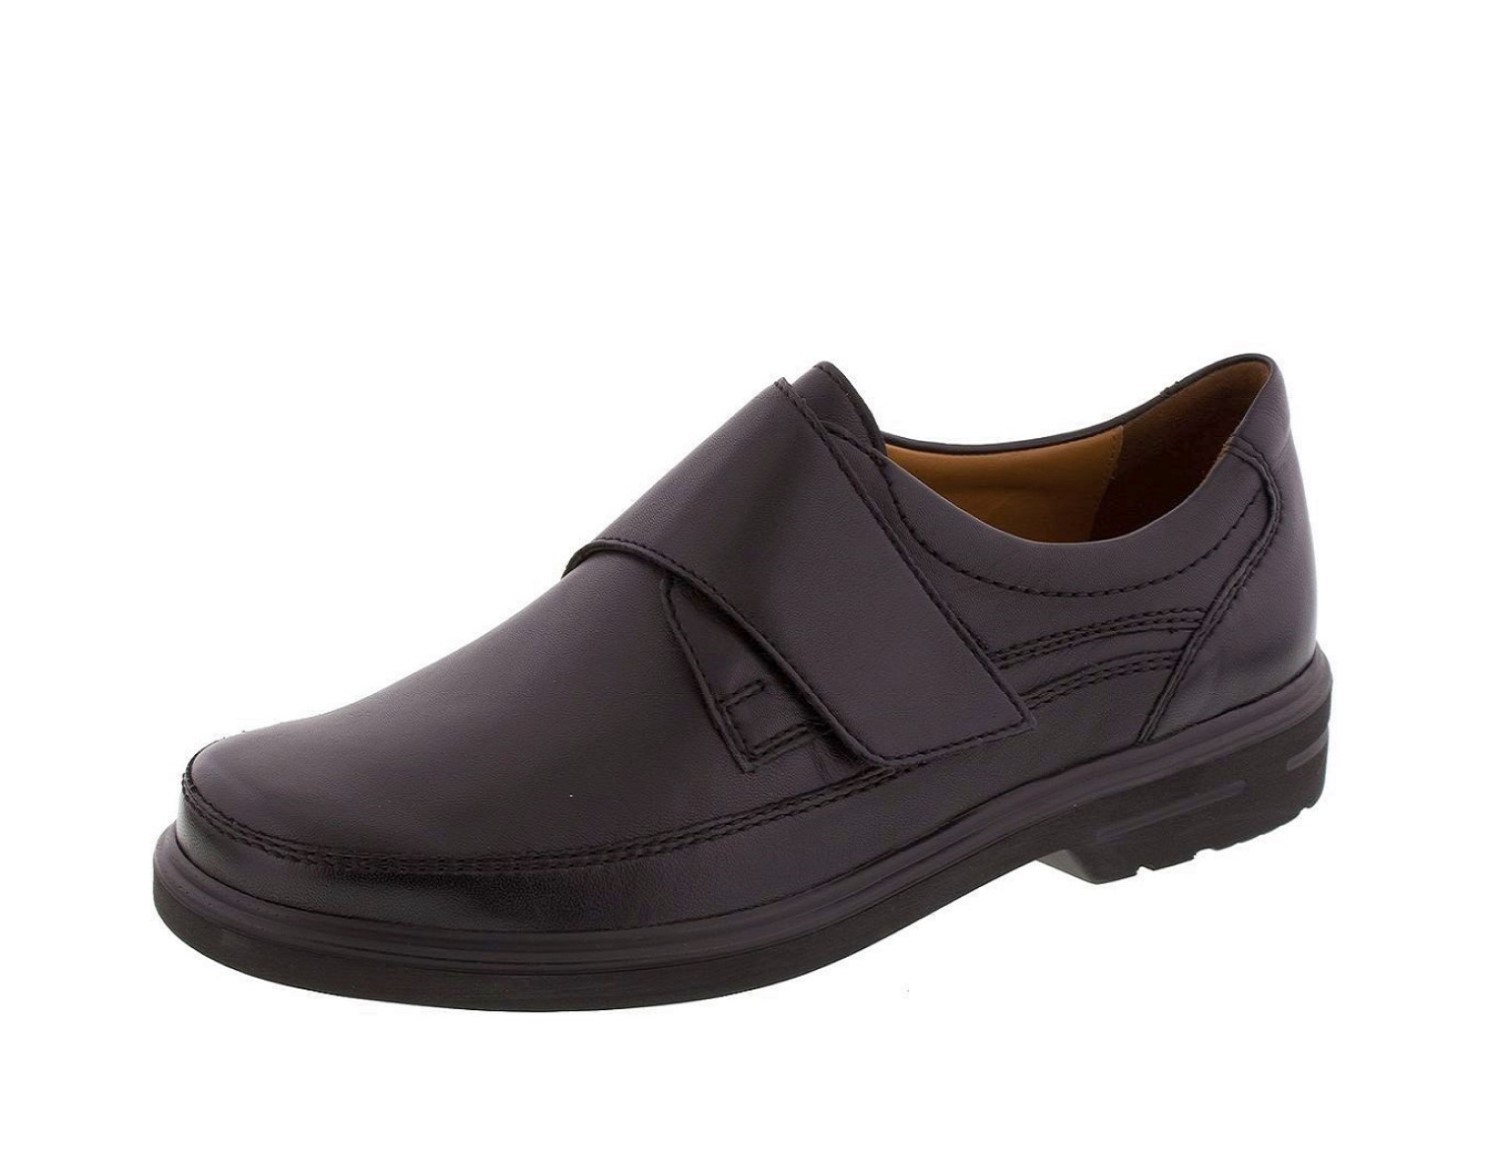 Buy Meredith Classic Penny Loafer| Blackheath Shoes